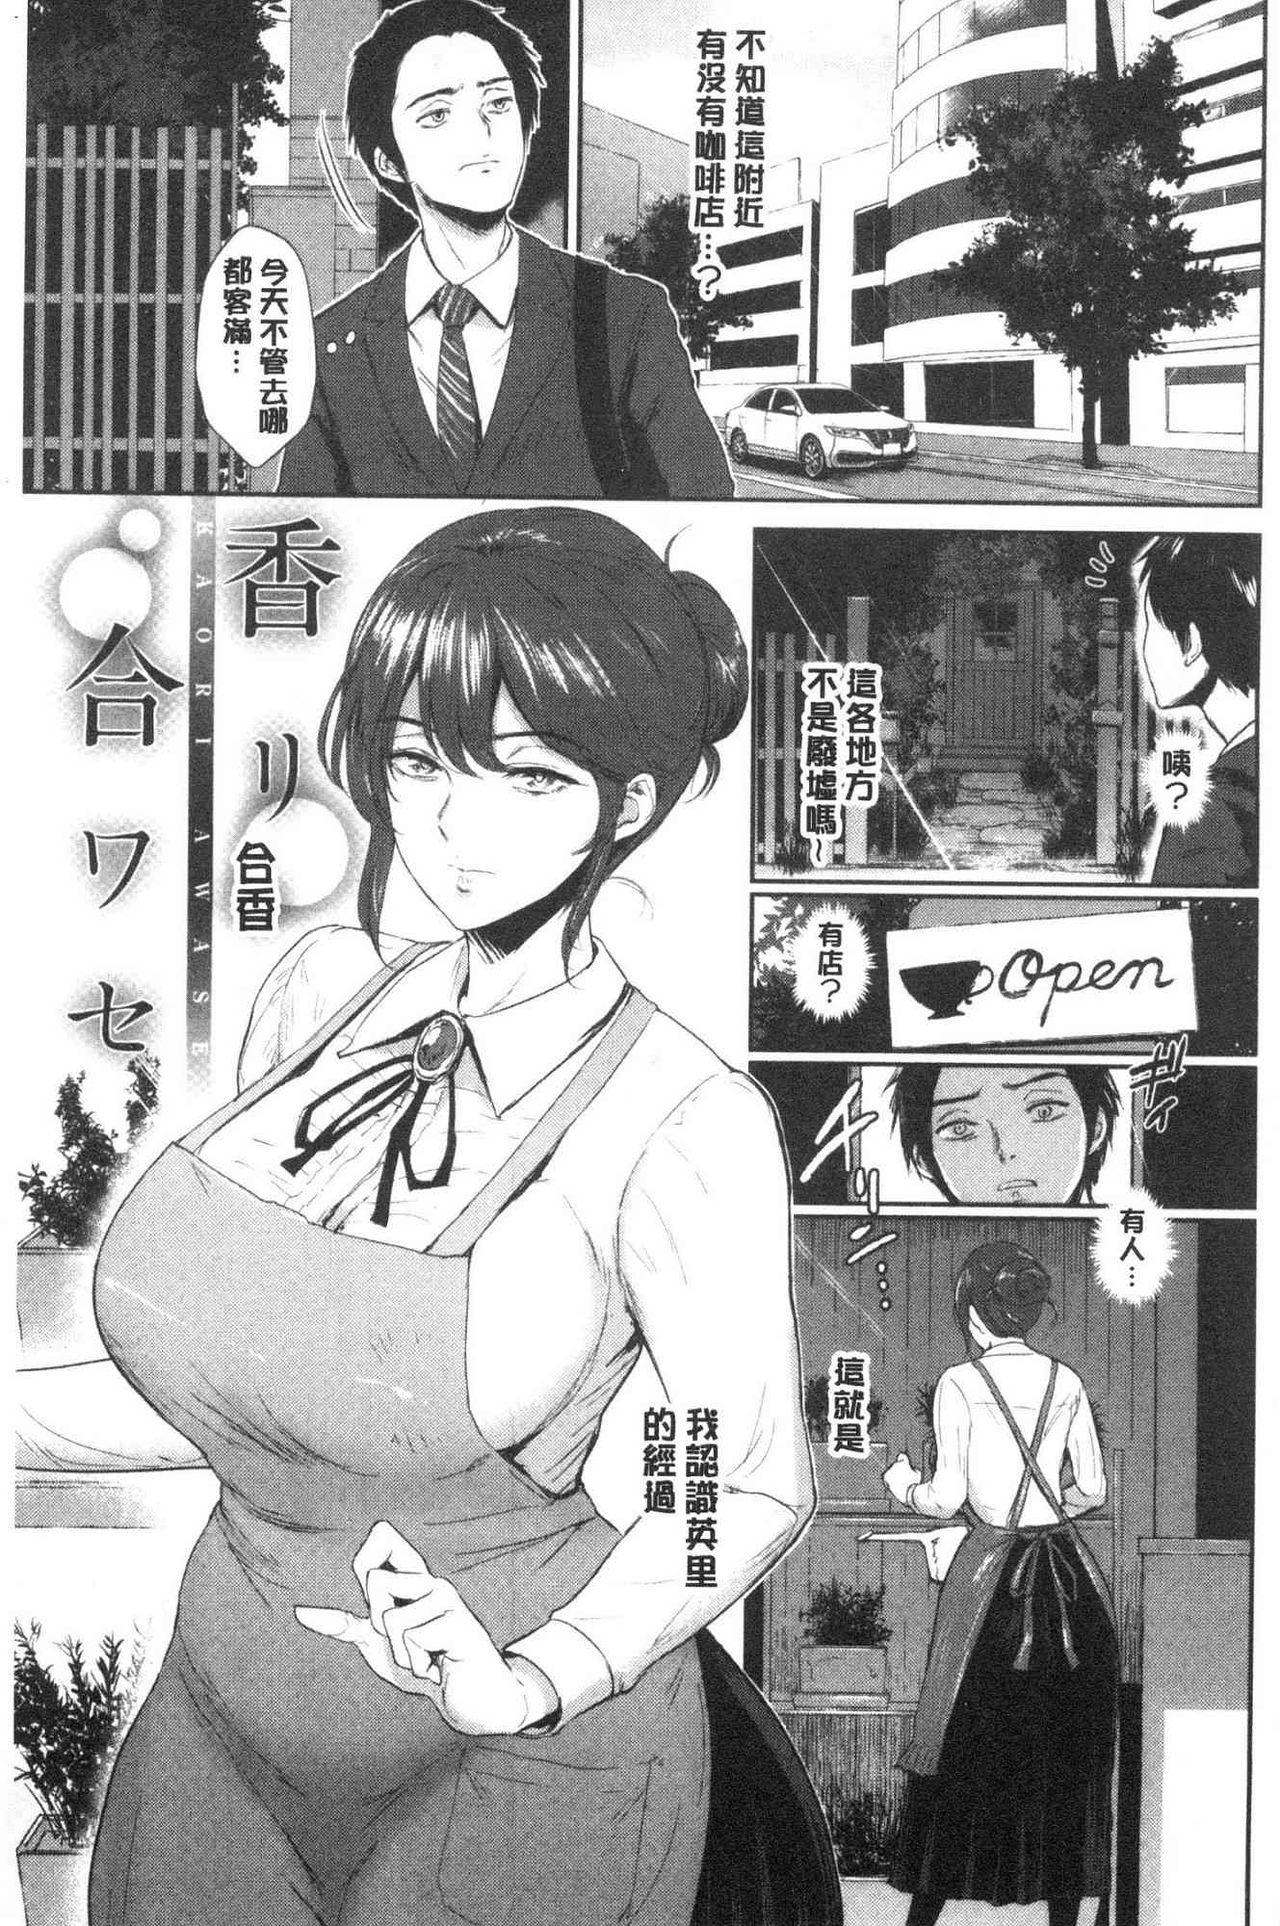 Class Room 情交の日々 Gostosa - Page 6